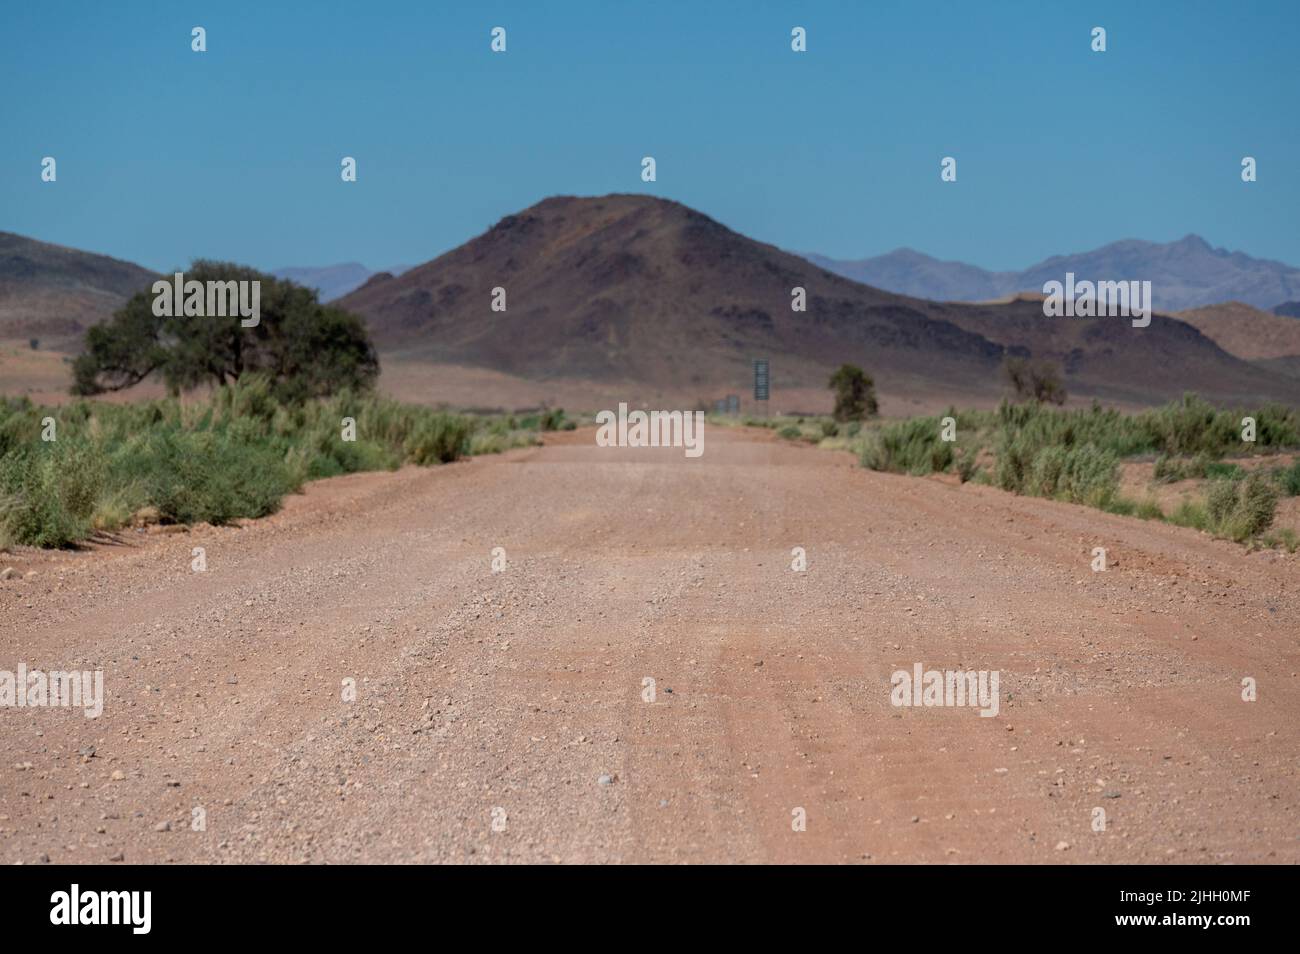 Road trip on a gravel road in Namibia Arika Stock Photo